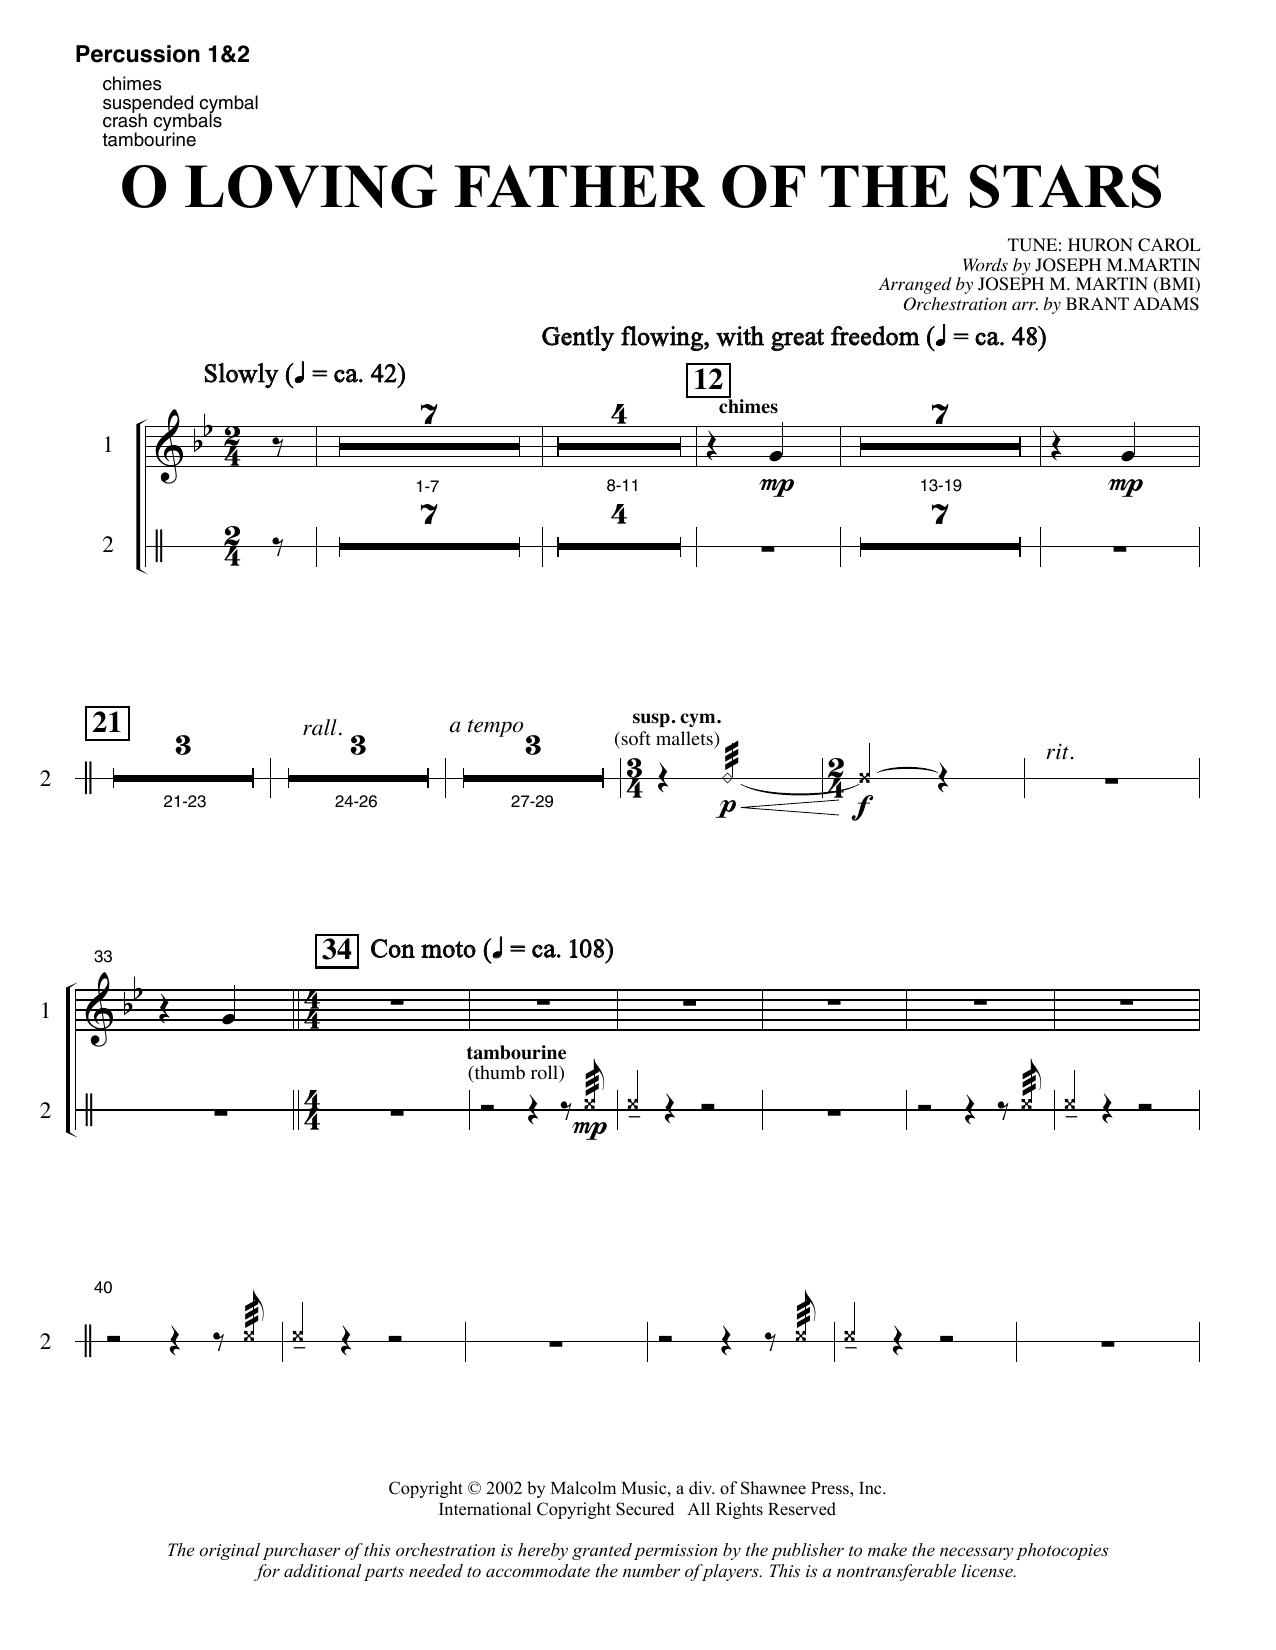 Joseph M. Martin O Loving Father Of The Stars (from Morning Star) - Percussion 1 & 2 sheet music notes and chords. Download Printable PDF.